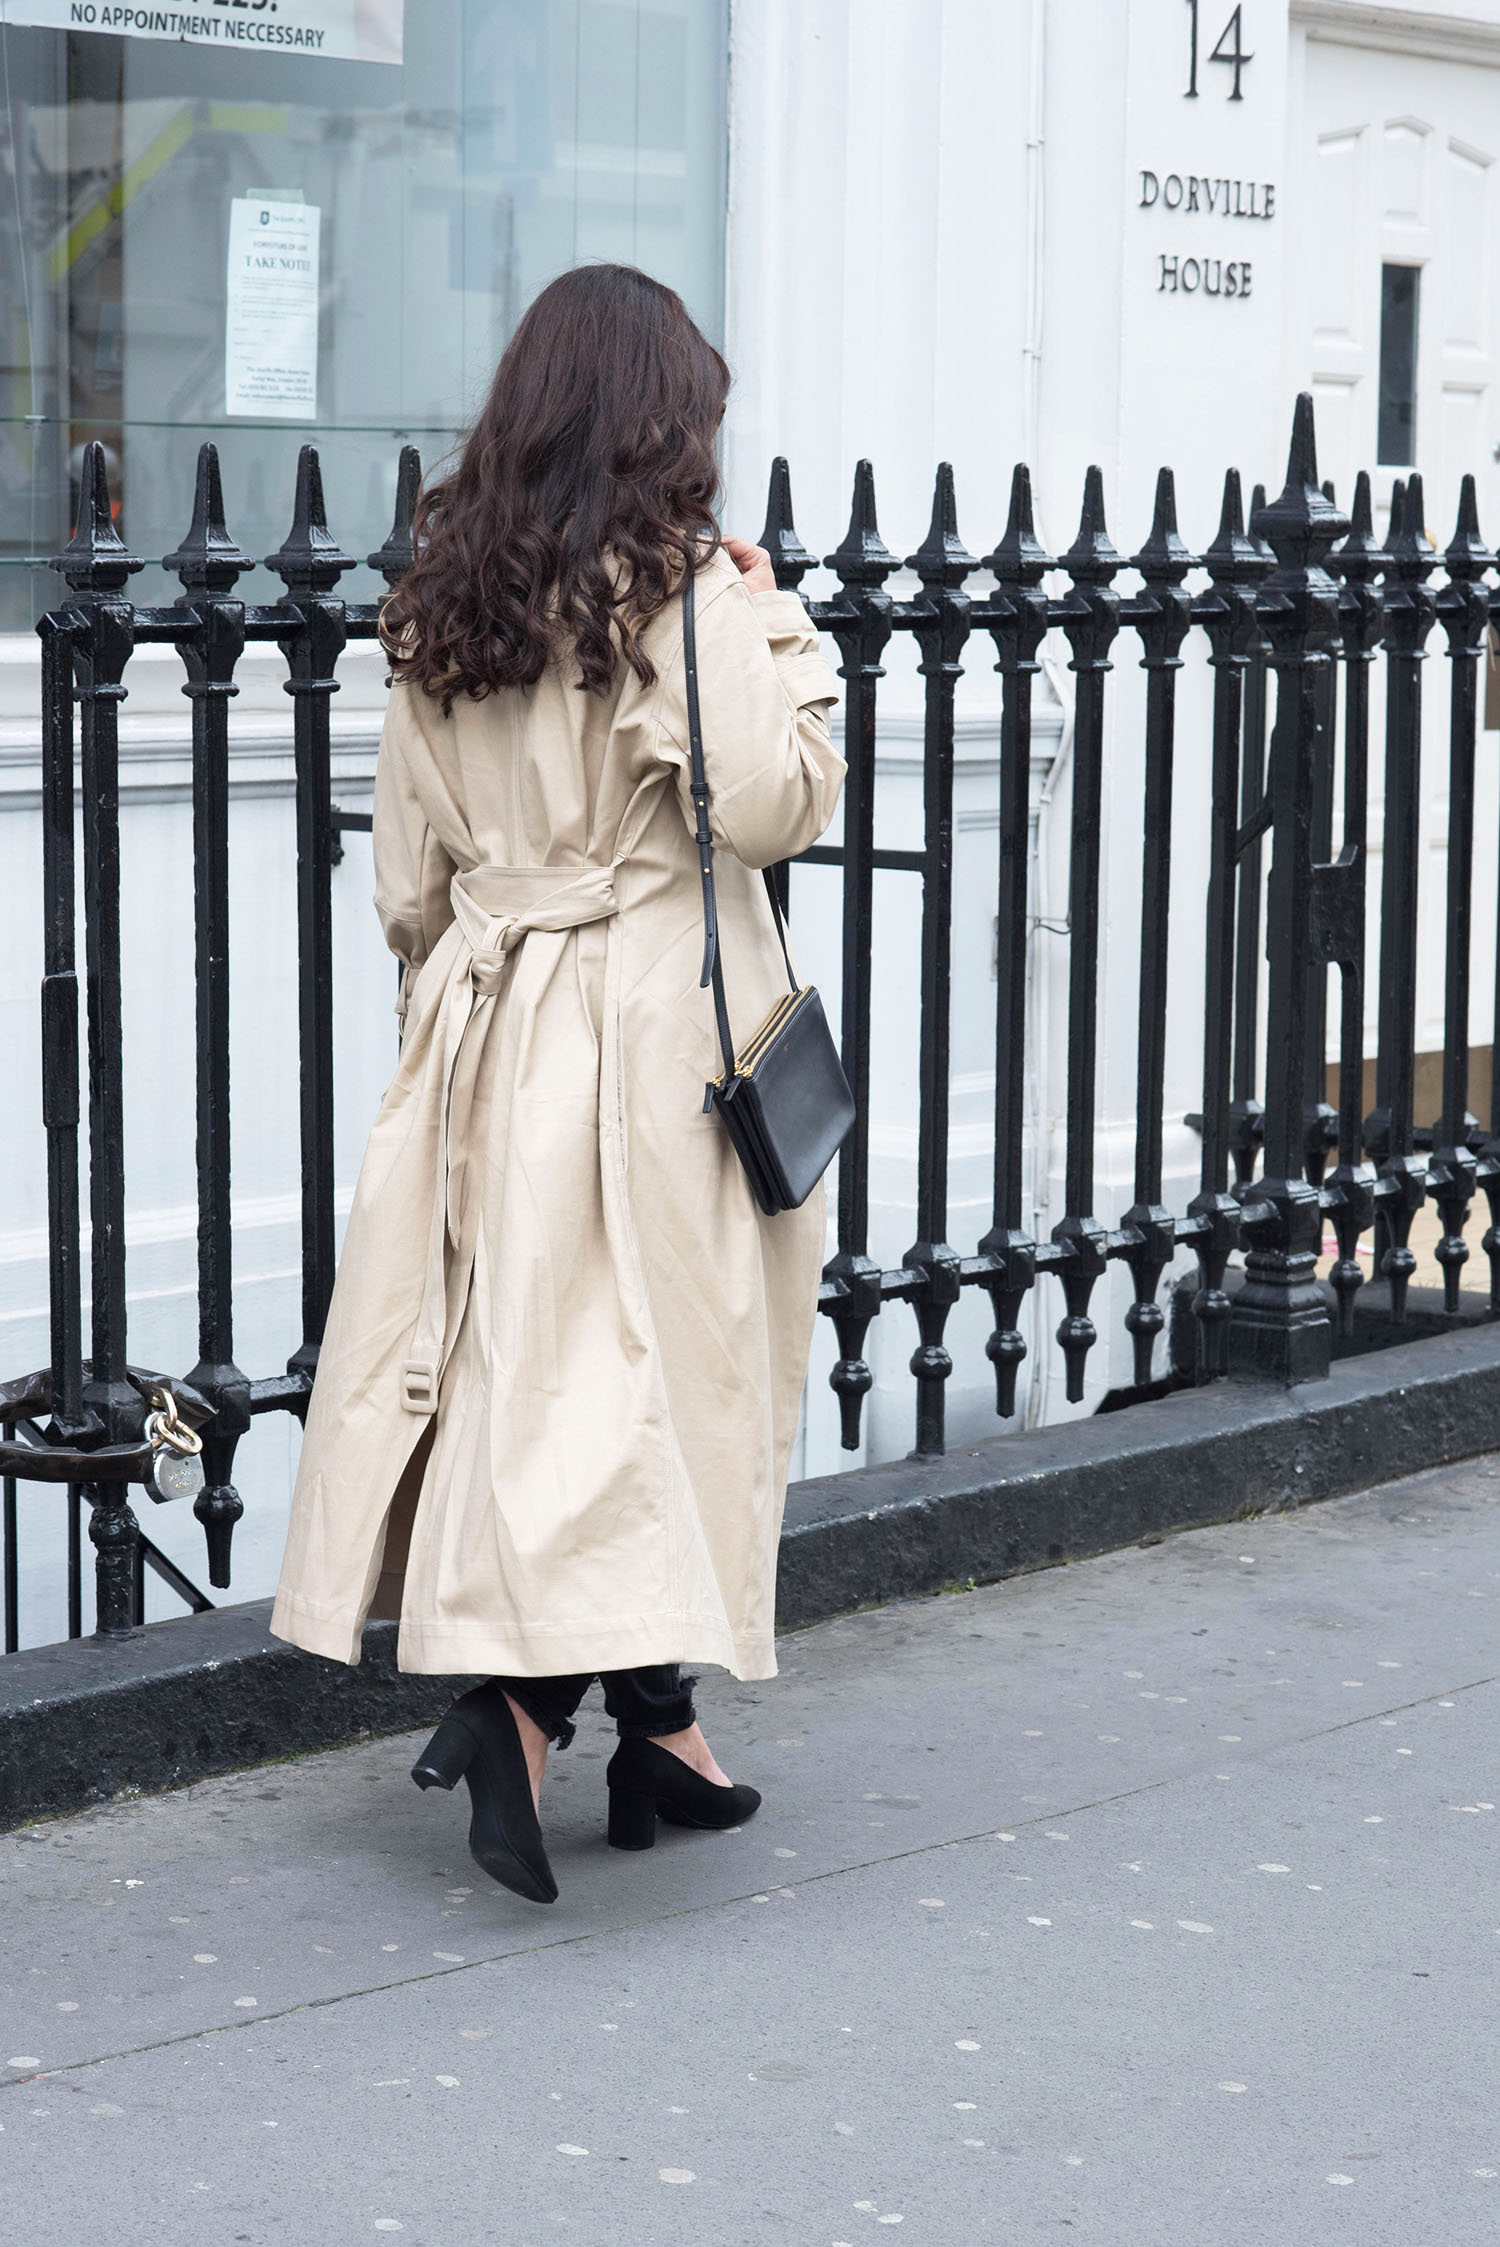 Fashion blogger Cee Fardoe of Coco & Vera walks in London wearing an H&M trench coat and carrying a Celine trio bag